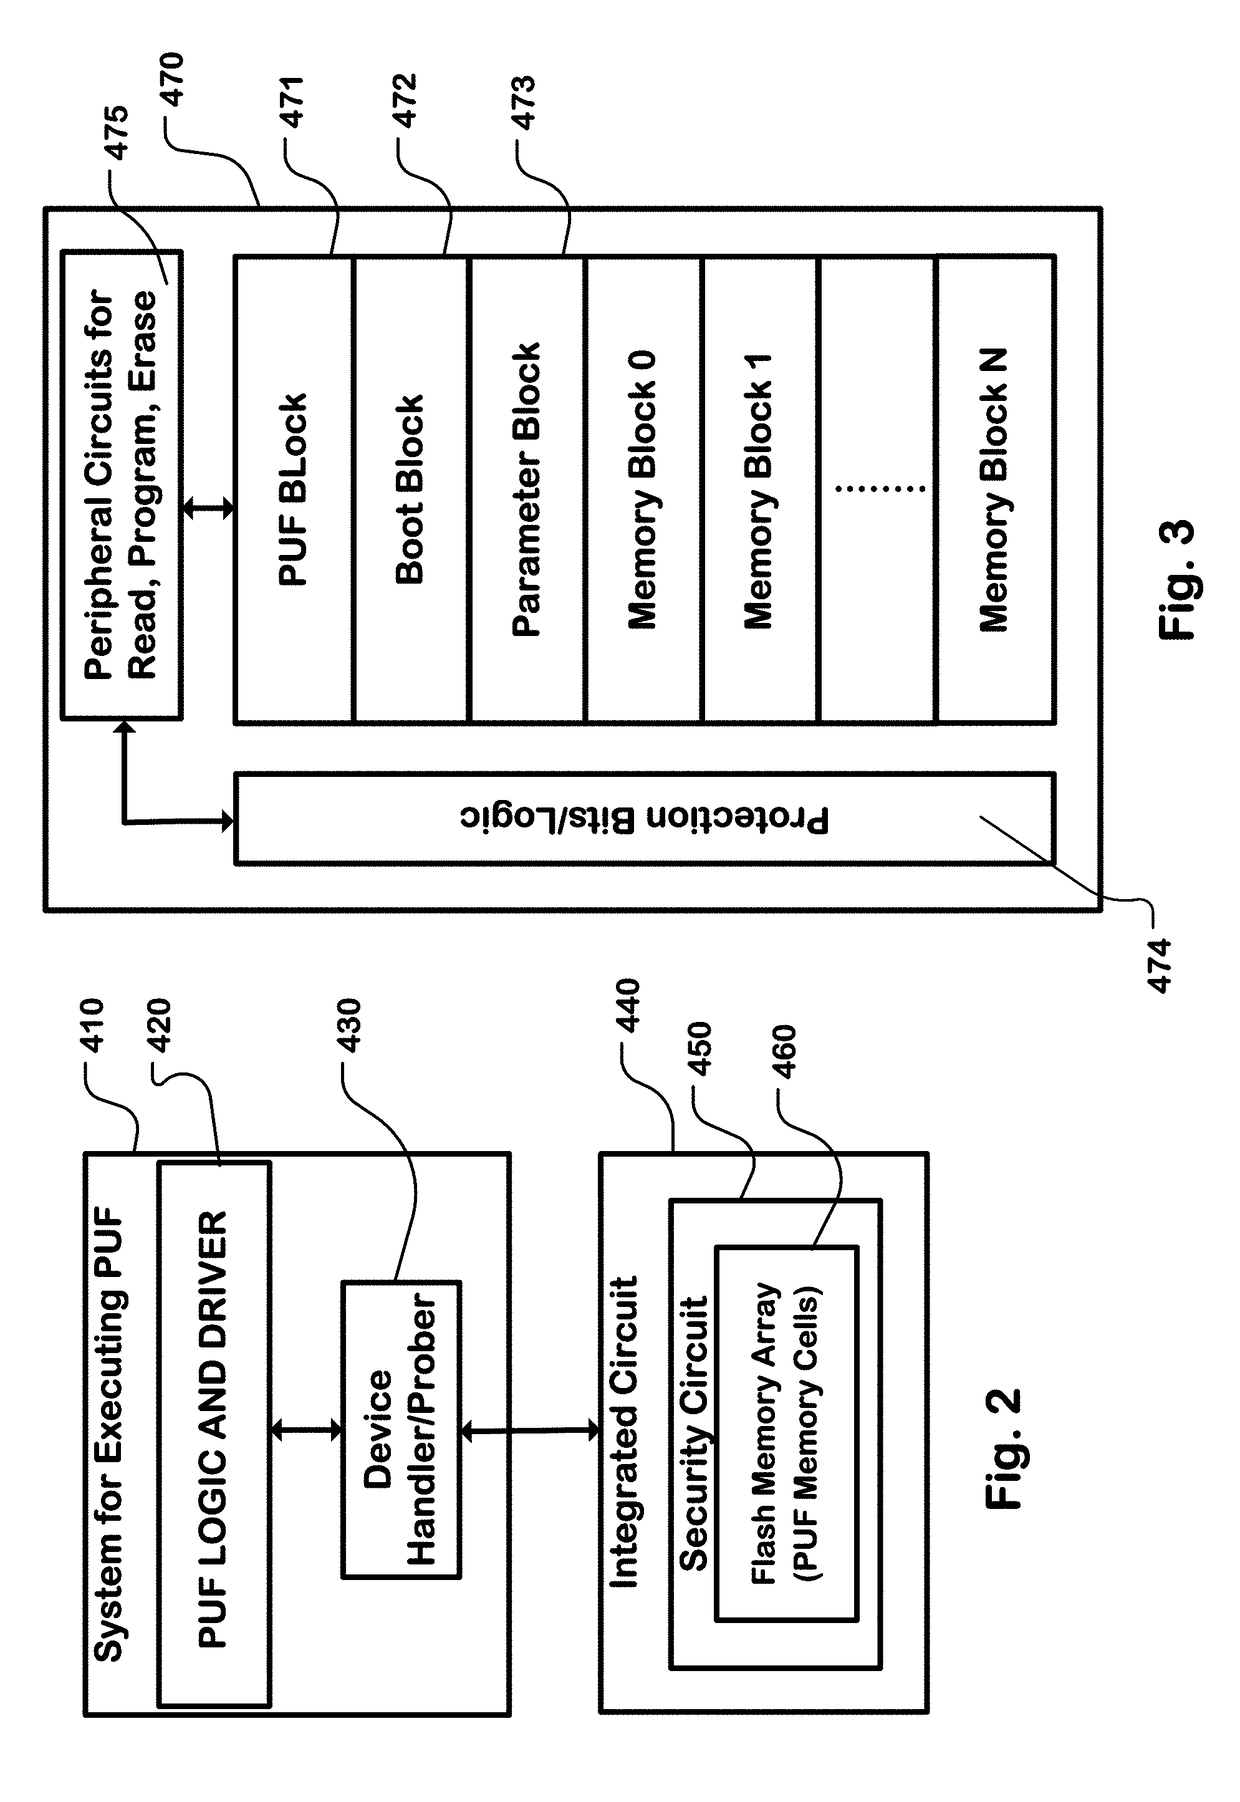 Non-volatile memory with physical unclonable function and random number generator